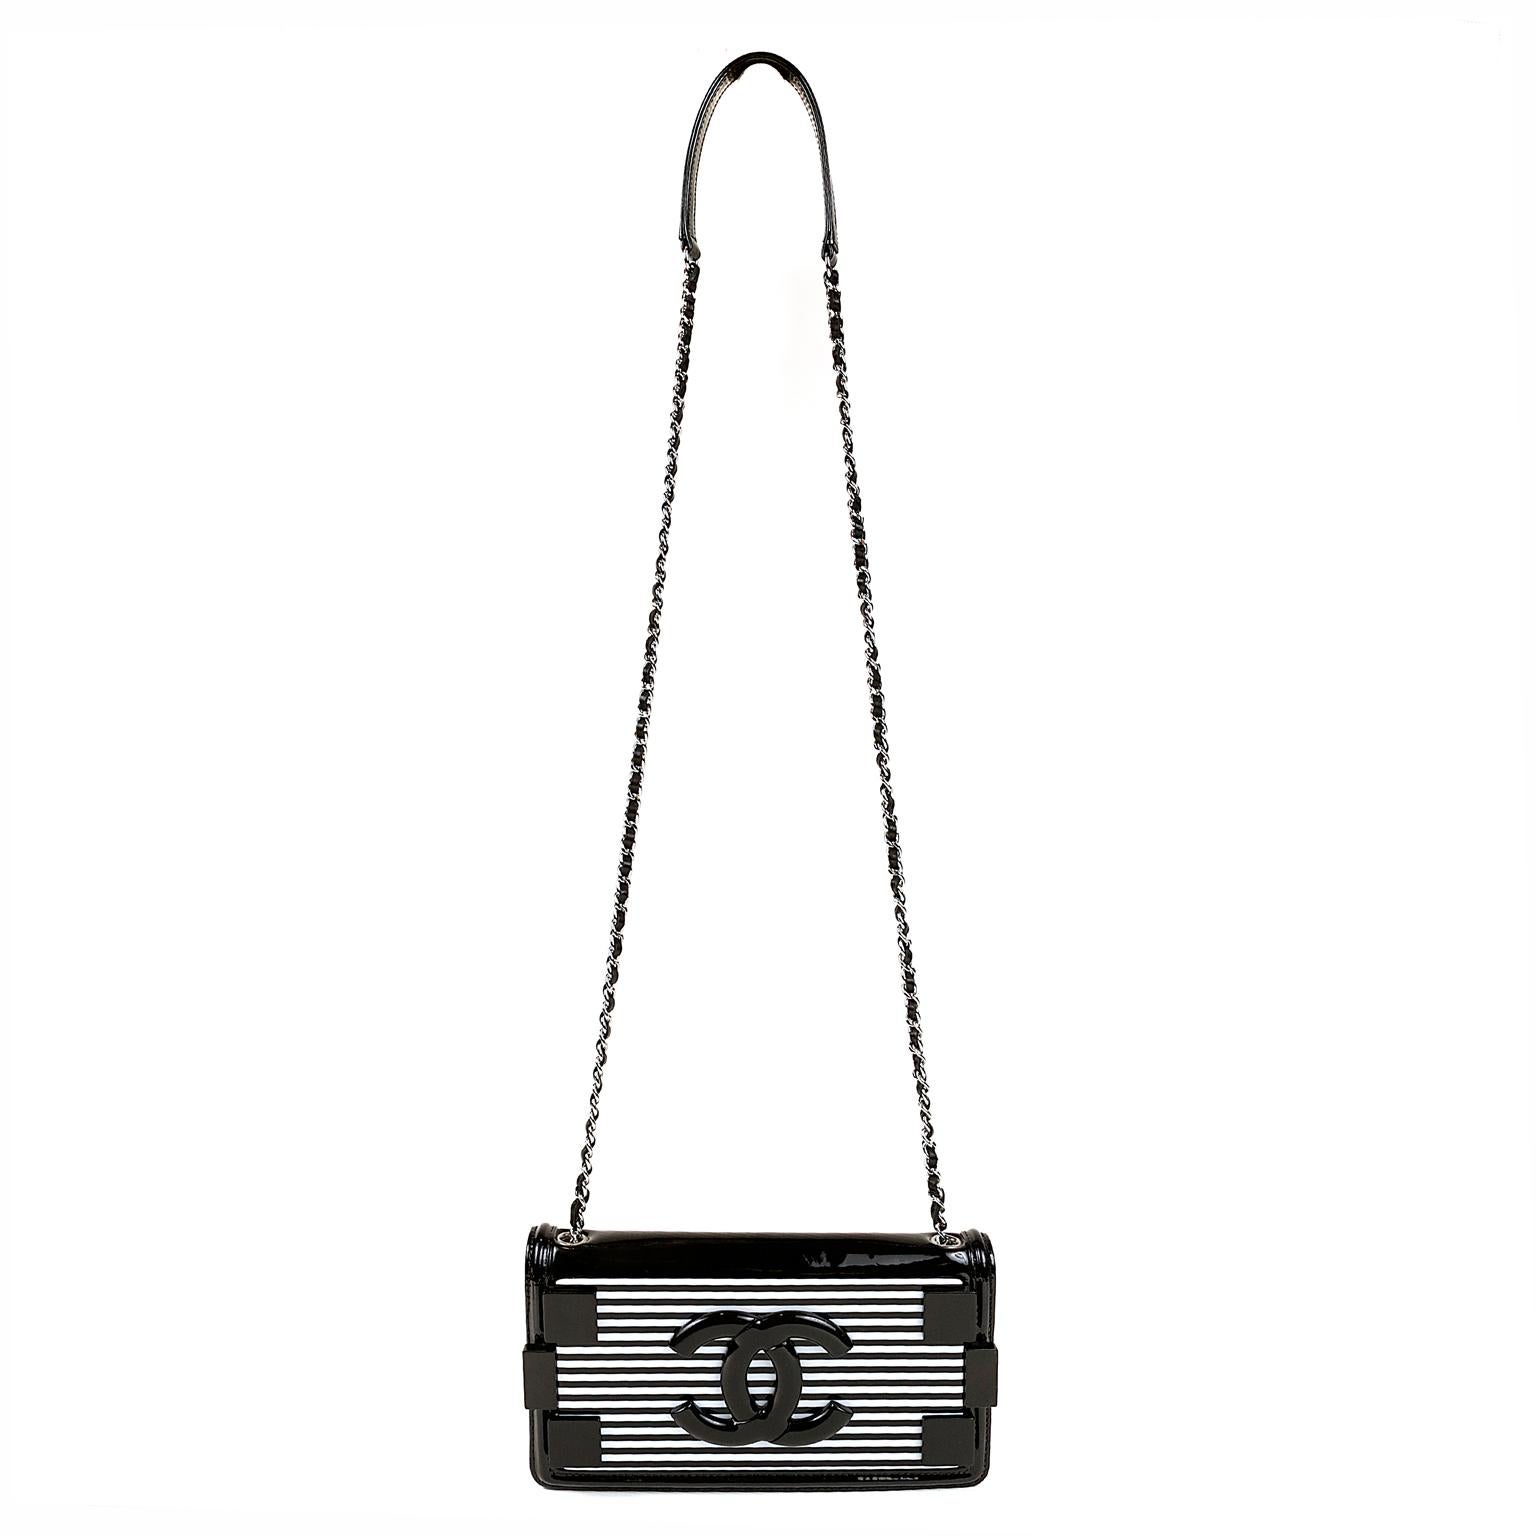 Chanel Black and White Striped Resin Patent Leather Boy Brick Bag 5